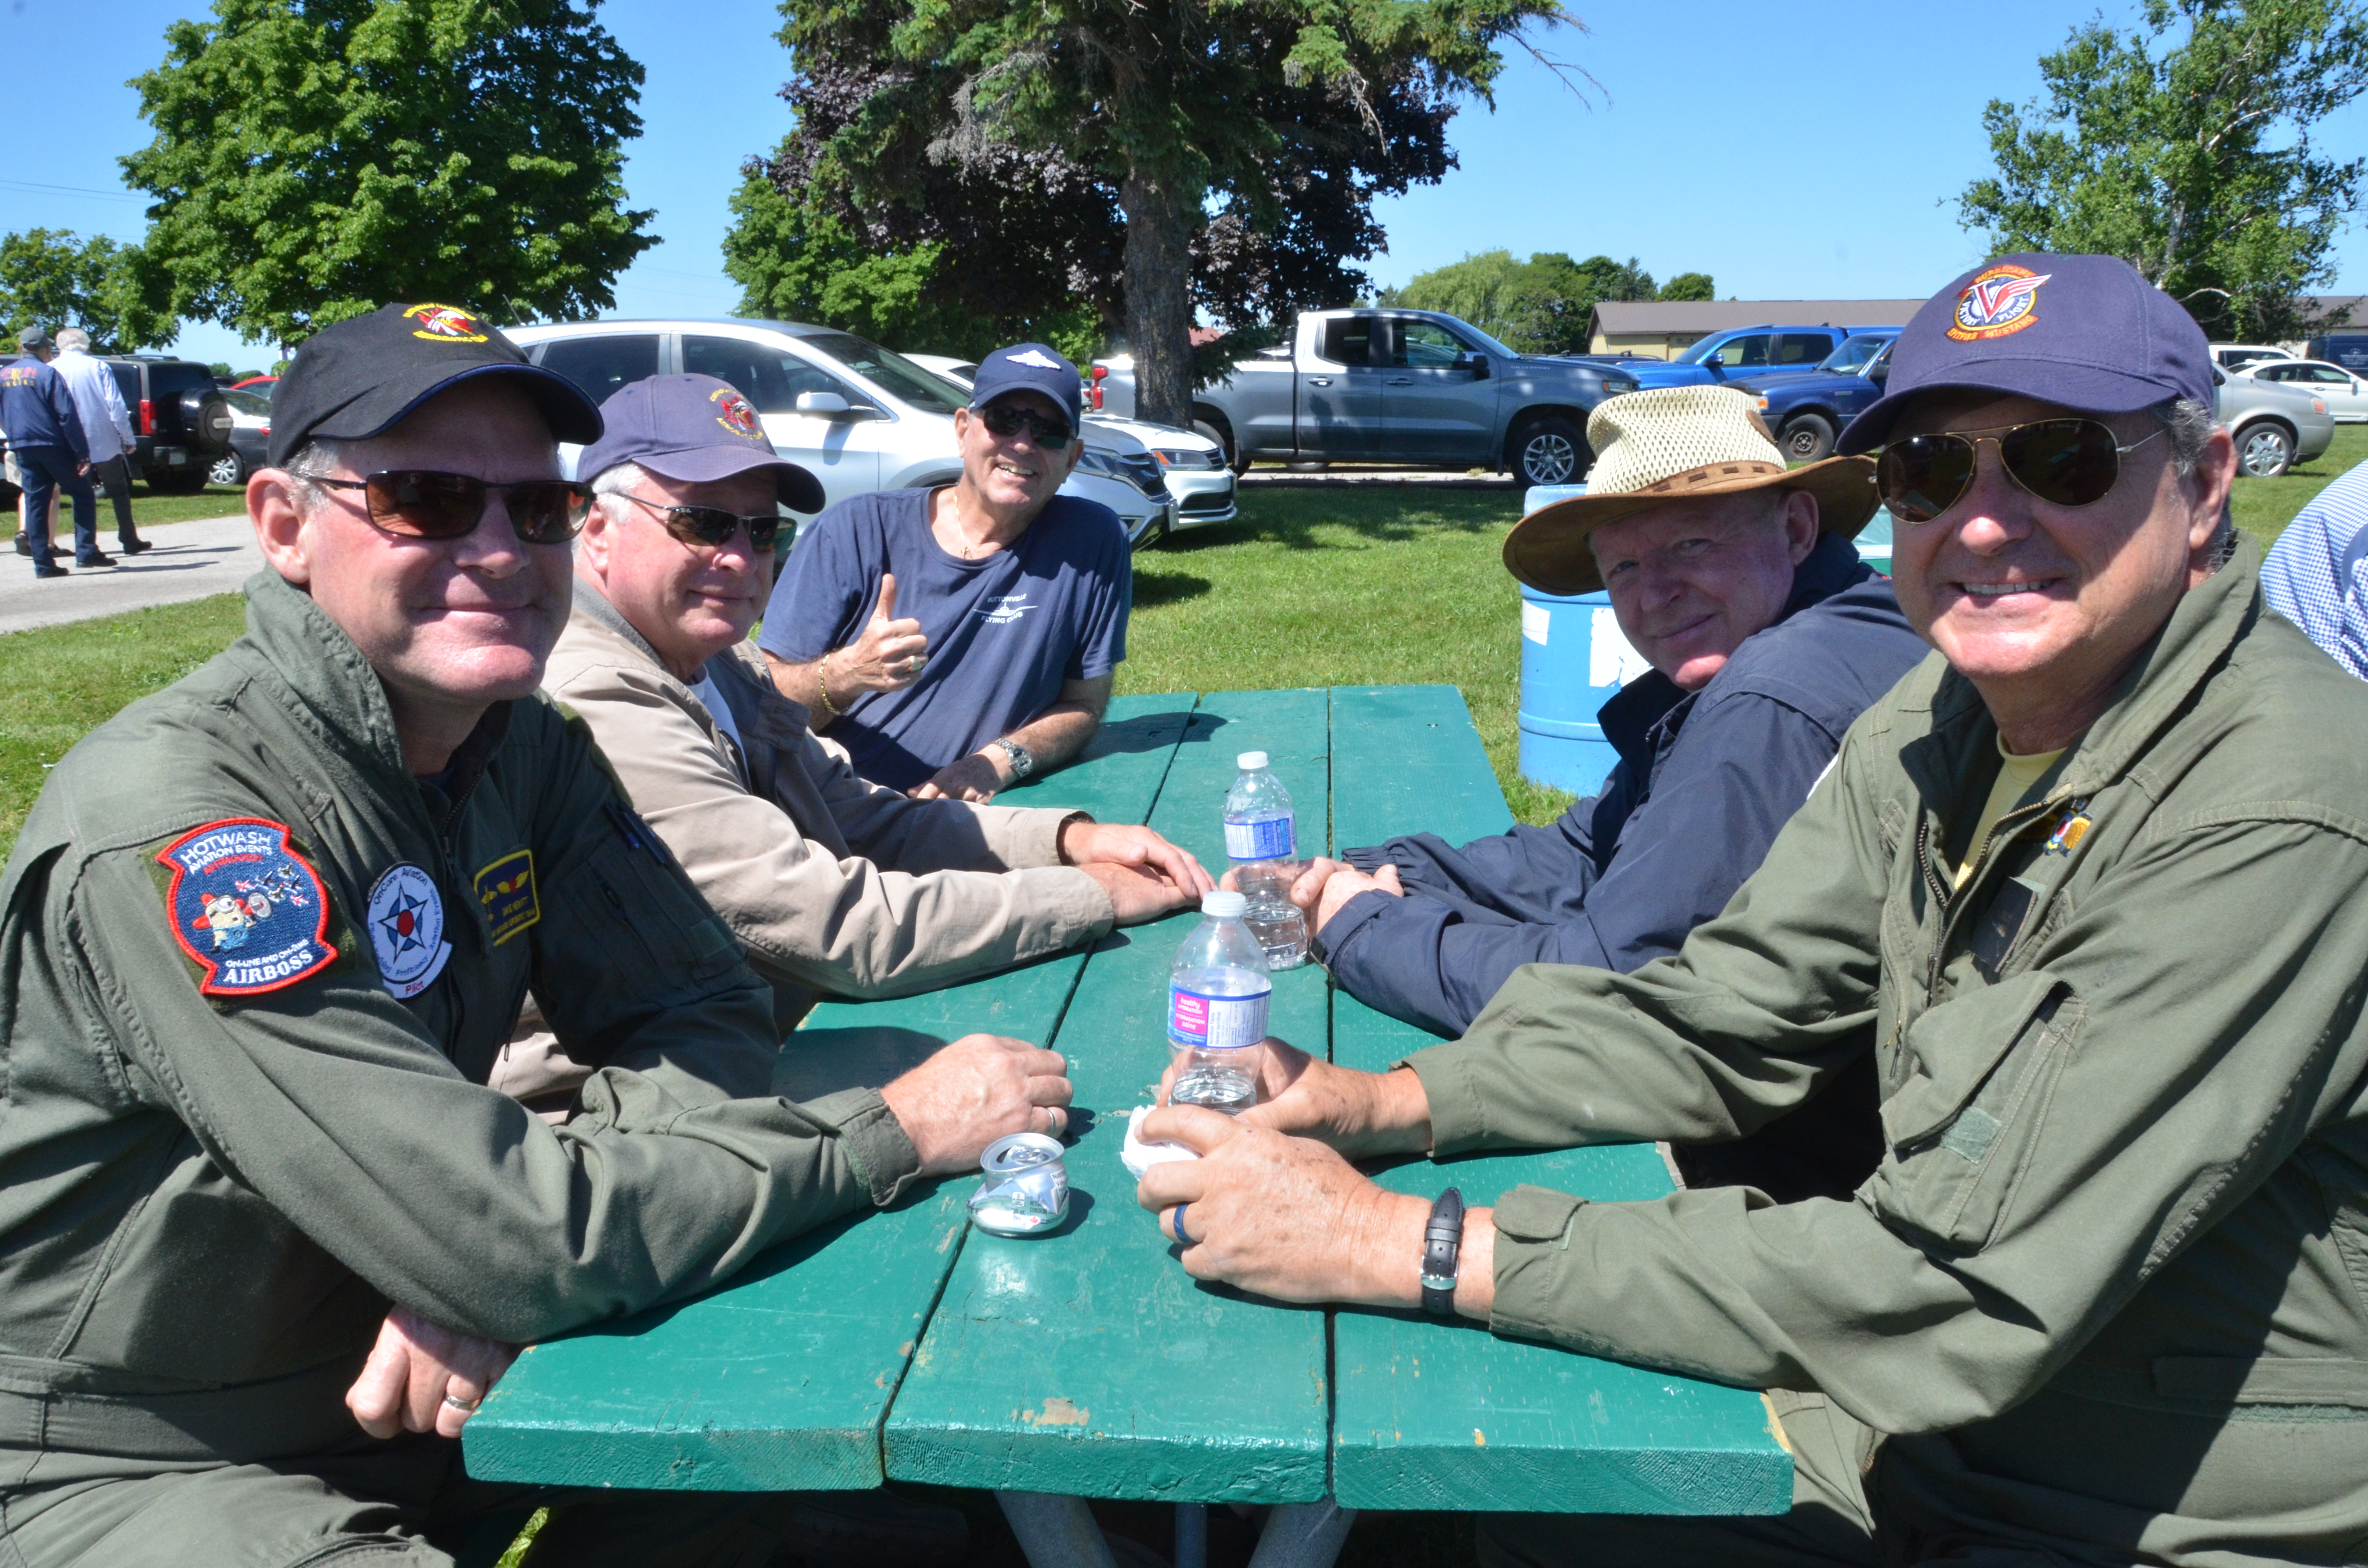 Woodstock Harvards pilots Dave Hewitt, Joe Cosmano, Pete Spence and Brian Pinder taking a break after a BBQ lunch. COPA Member Marvin Kalchman giving a big Thumbs Up to the Lancaster Fly In.